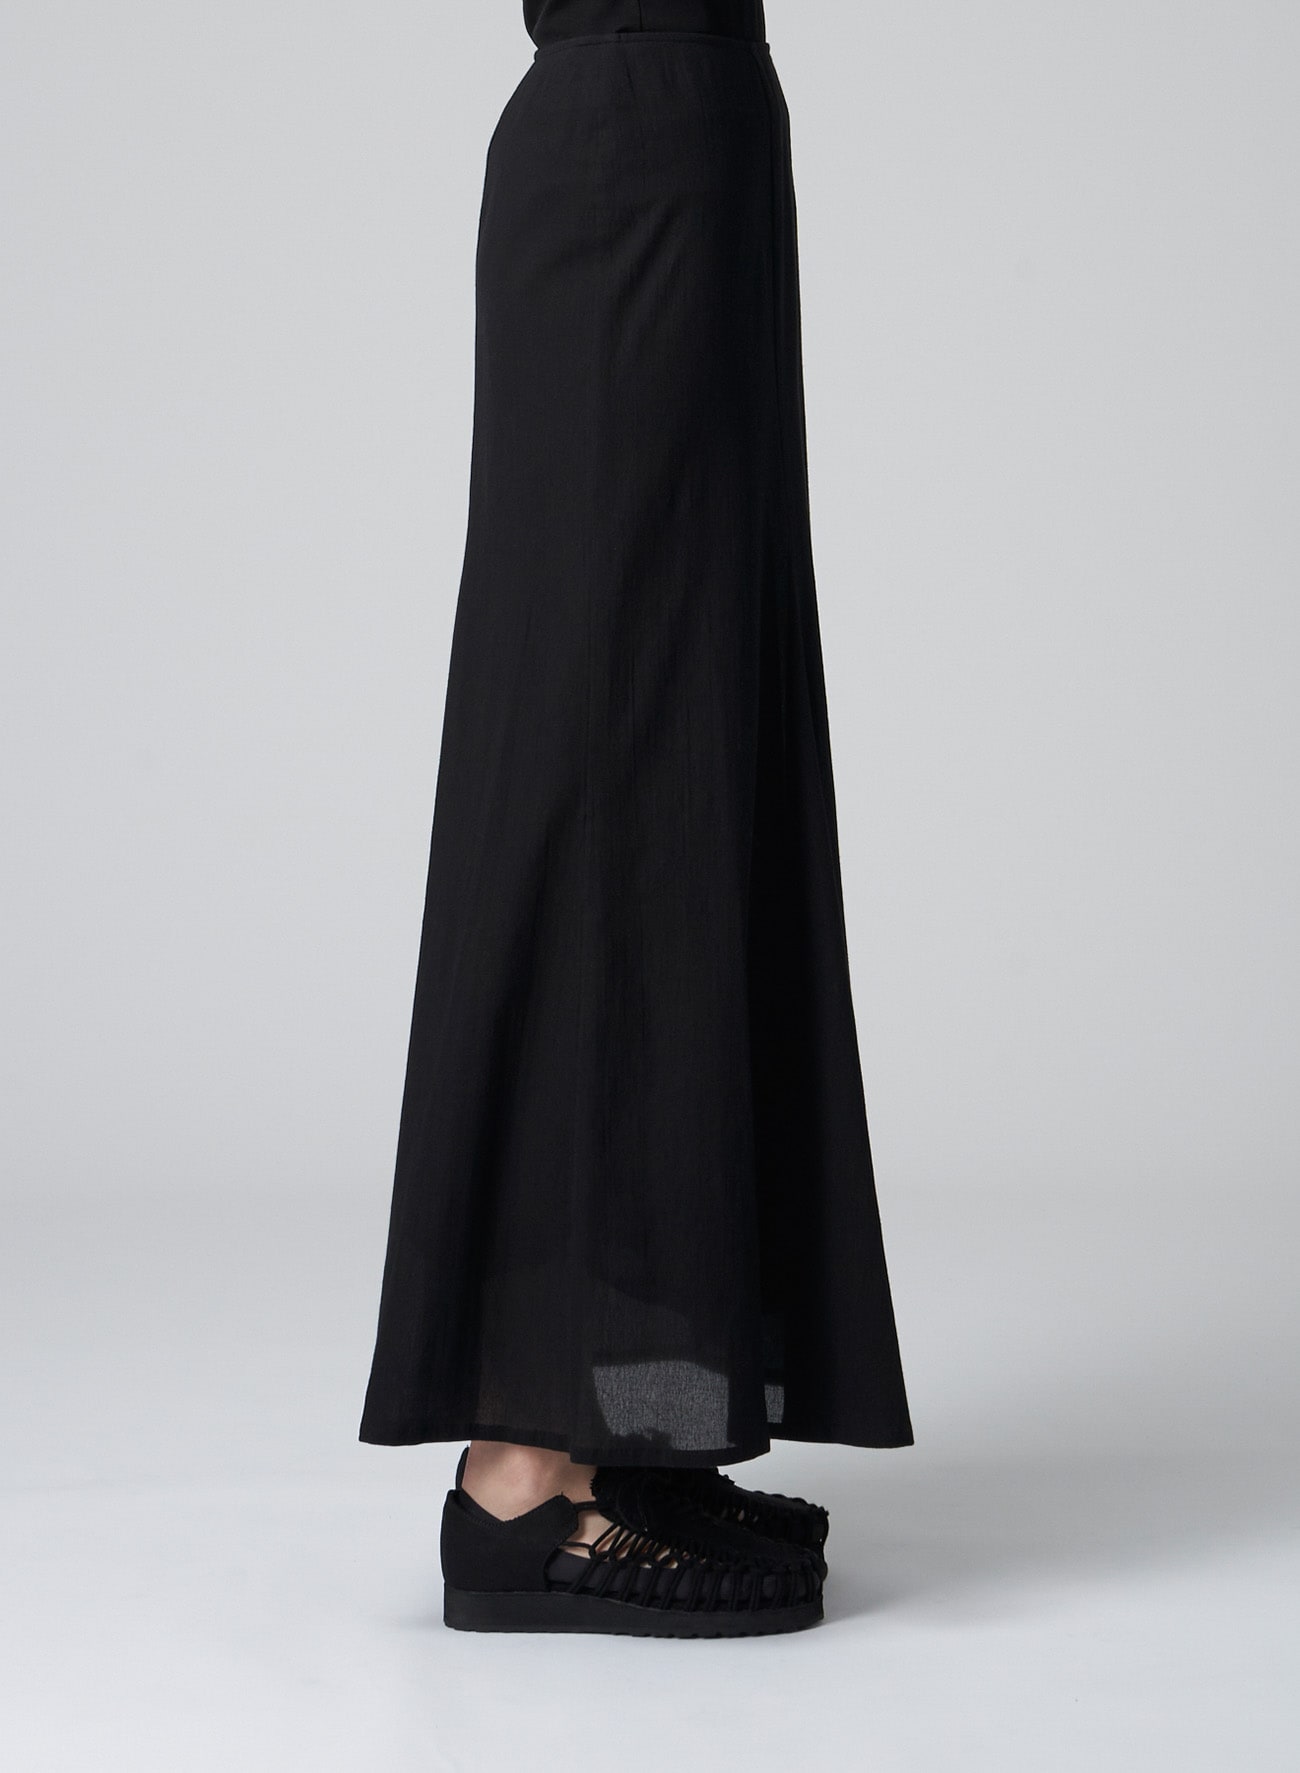 C/CHIFFON DOUBLE LAYERED RIGHT SIDE FLARE S